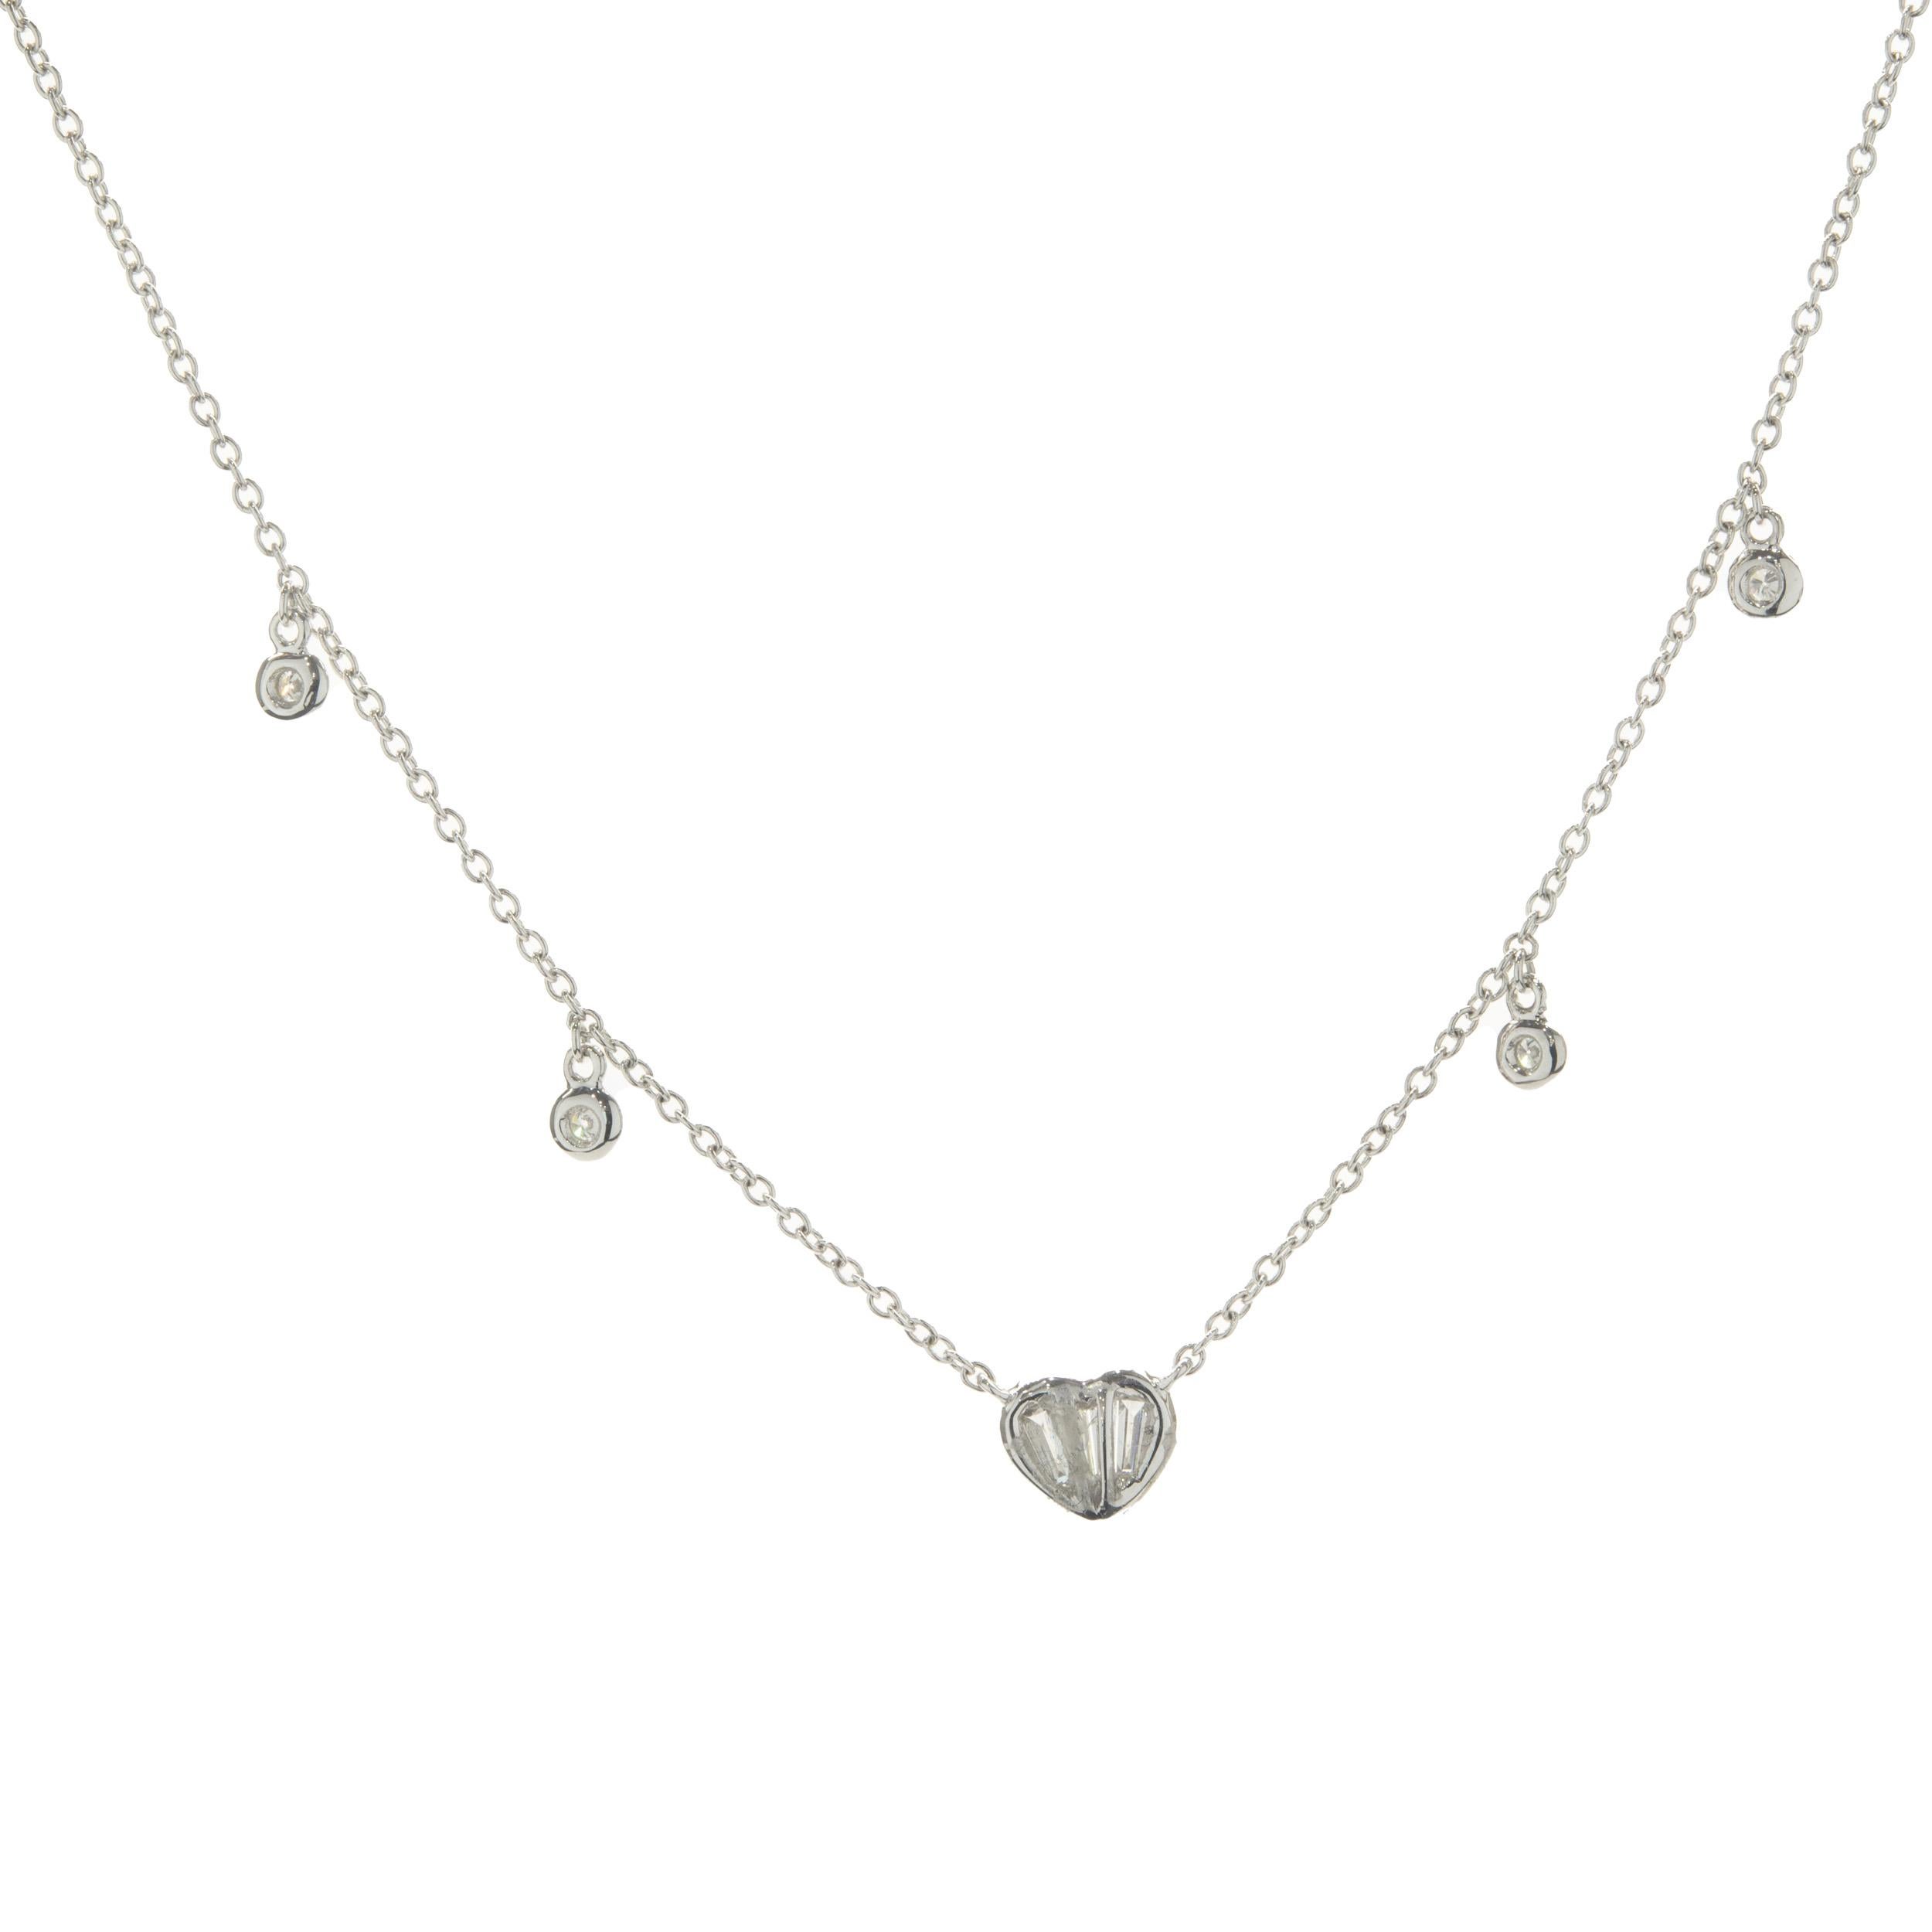 Designer: custom design
Material: 14K white gold
Diamond: round brilliant & baguette cut = 0.19cttw
Color: G 
Clarity: SI1
Dimensions: necklace measures 18-inches in length 
Weight: 2.30 grams
